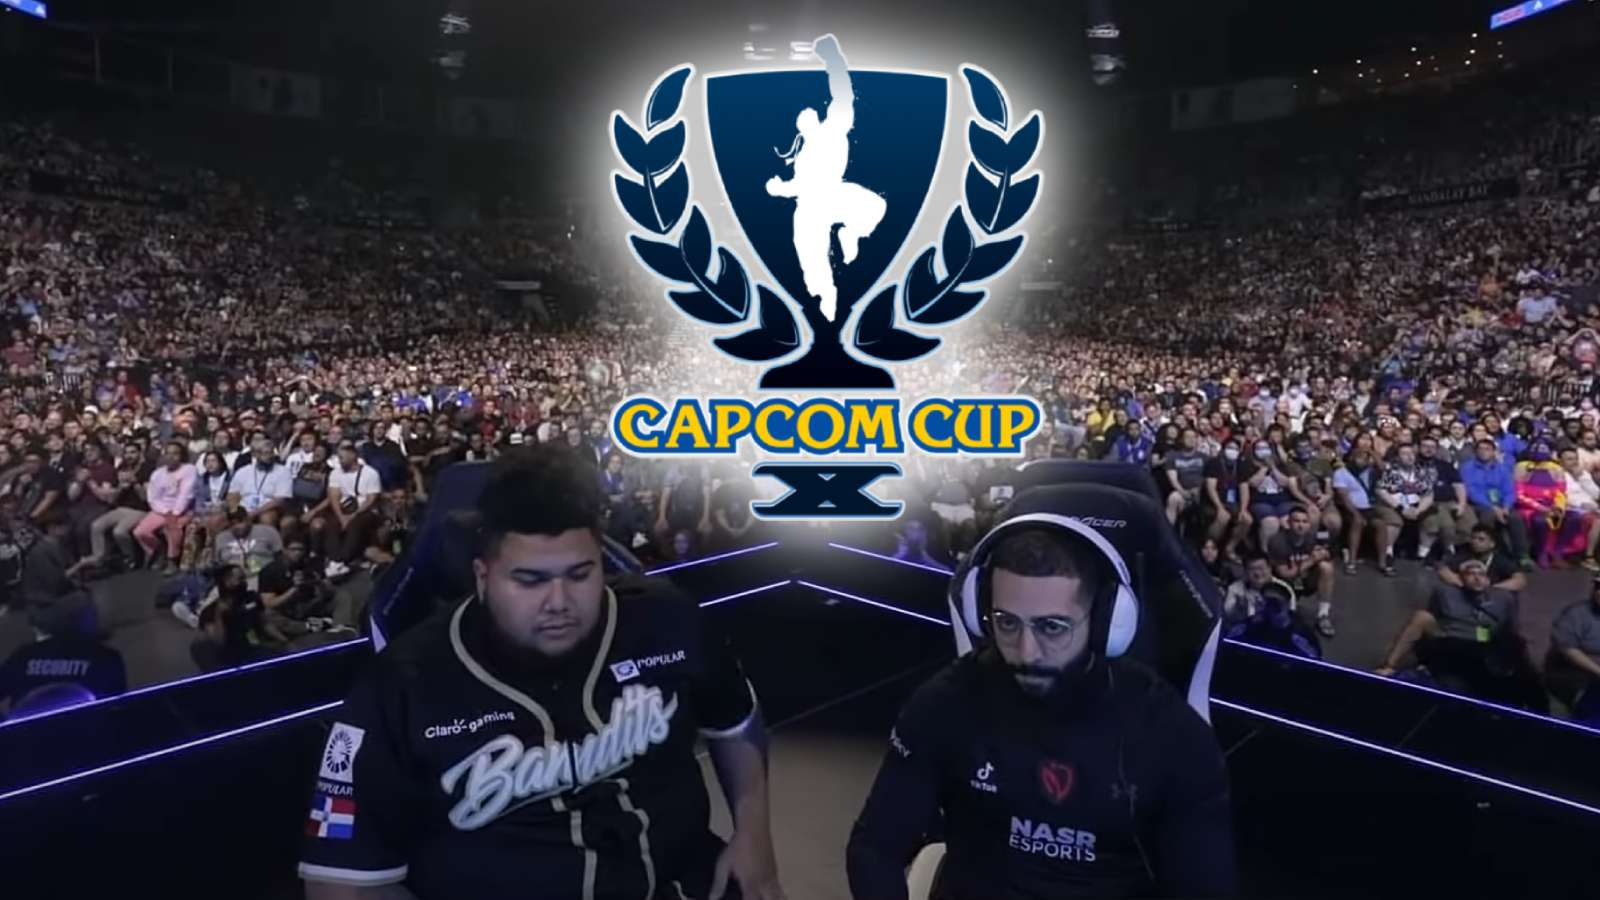 MenaRD and Angrybird in a tournament with Capcom Cup X Logo